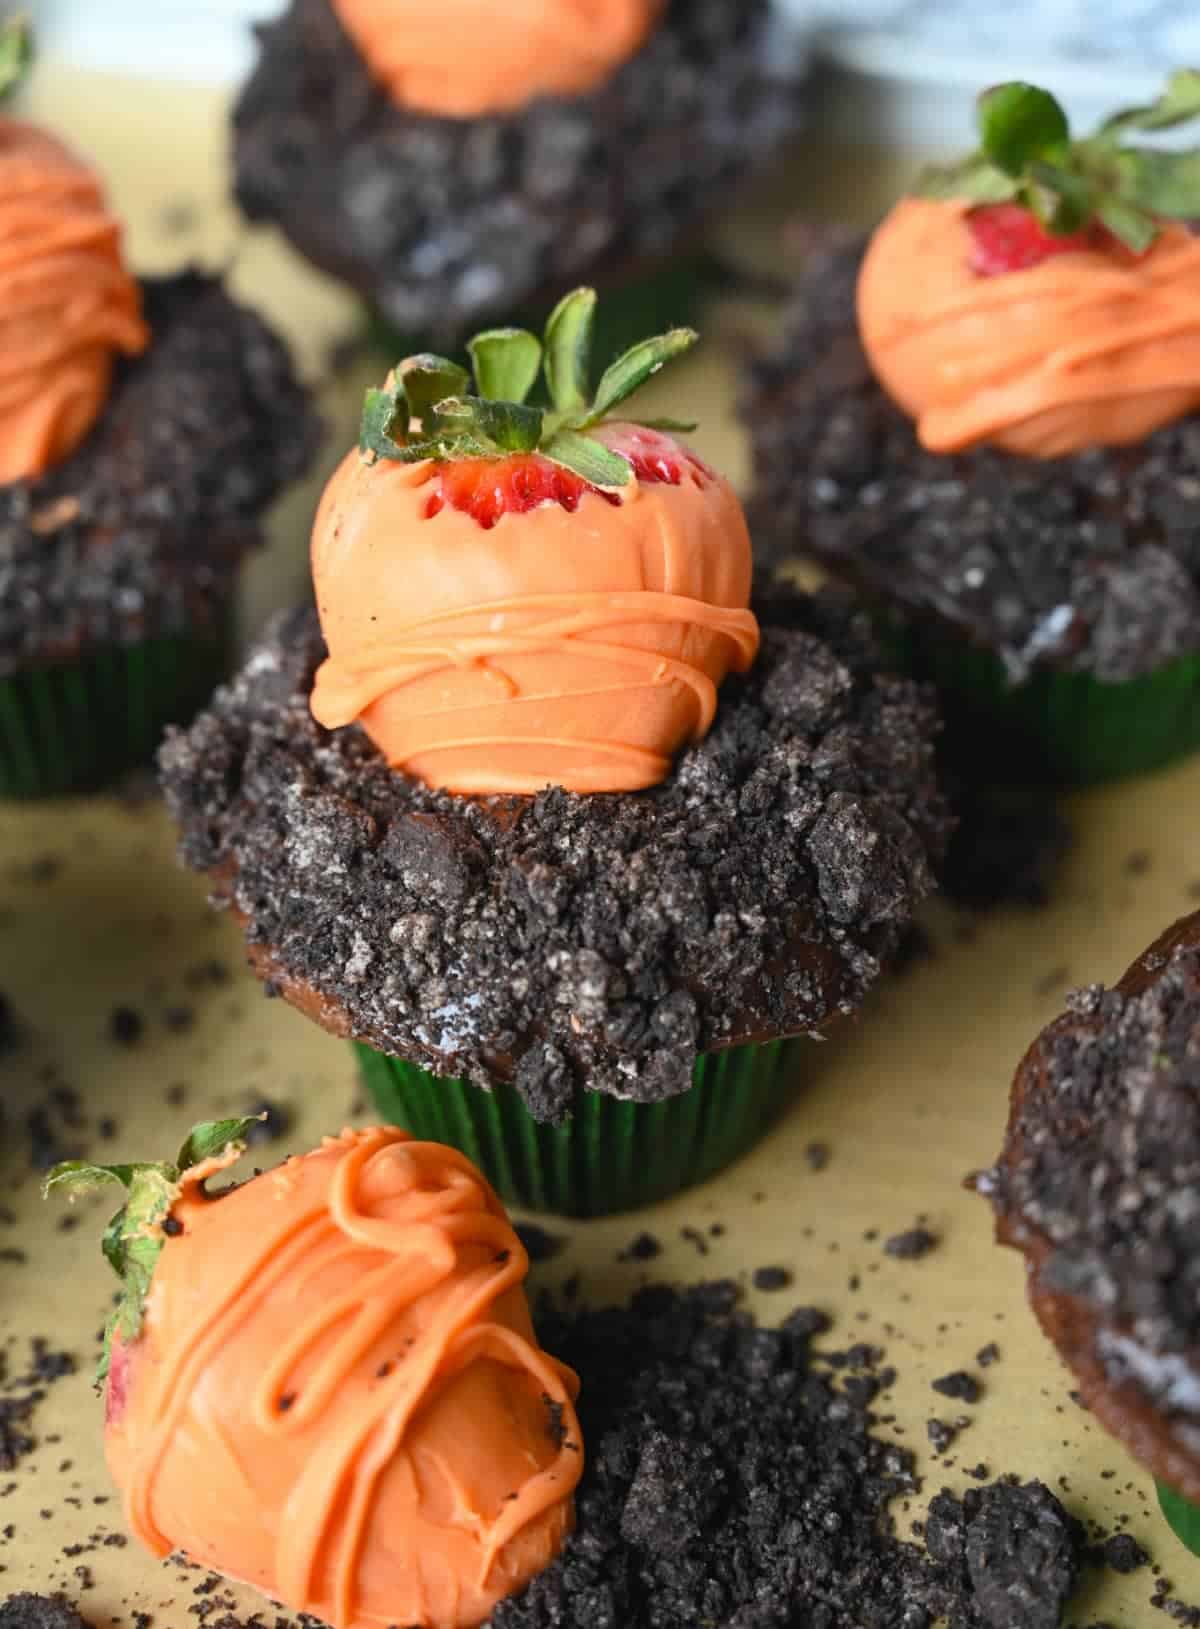 Five chocolate cupcakes with crushed oreos on top to look like dirt and a chocolate covered strawberry on top to look like a carrot.